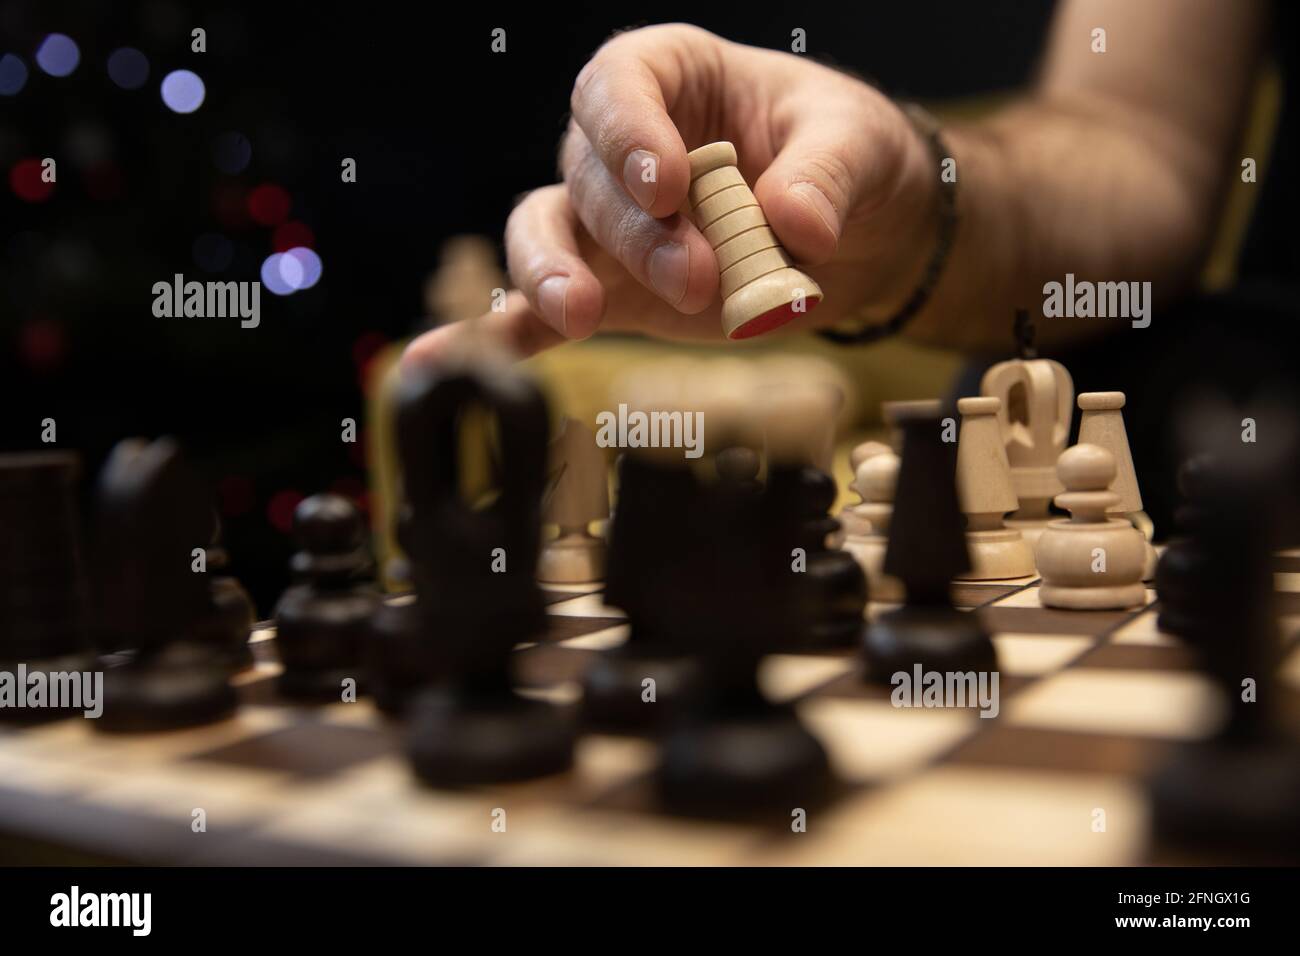 Hand taking next step on chess game. Human hand moving wooden white rook piece Stock Photo